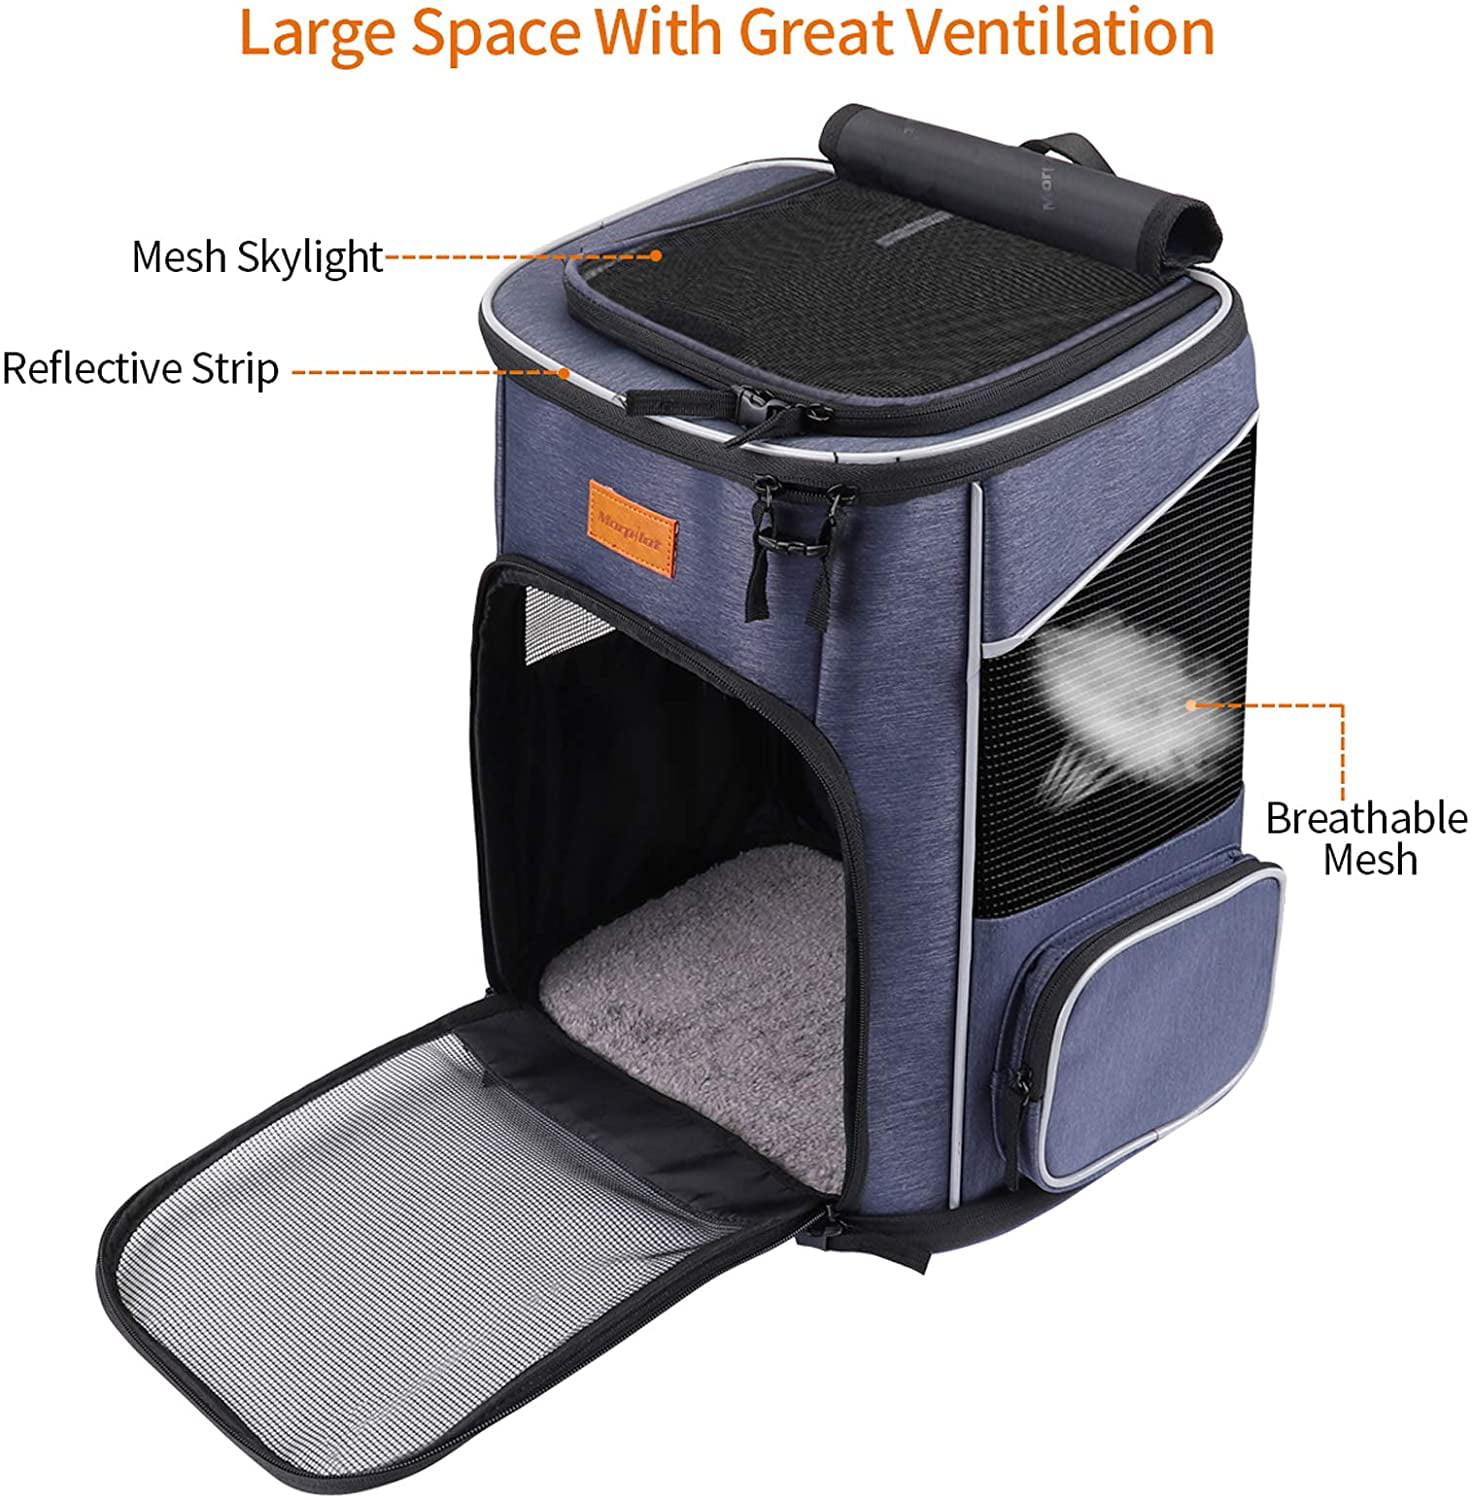 Ventilated Design Pet Travel Carrier Backpack with Inner Safety Strap morpilot Dog Backpack Carrier Cat Carrying Bag for Travel Hiking Camping Cat Backpack Carrier for Small Cats and Dogs Puppies